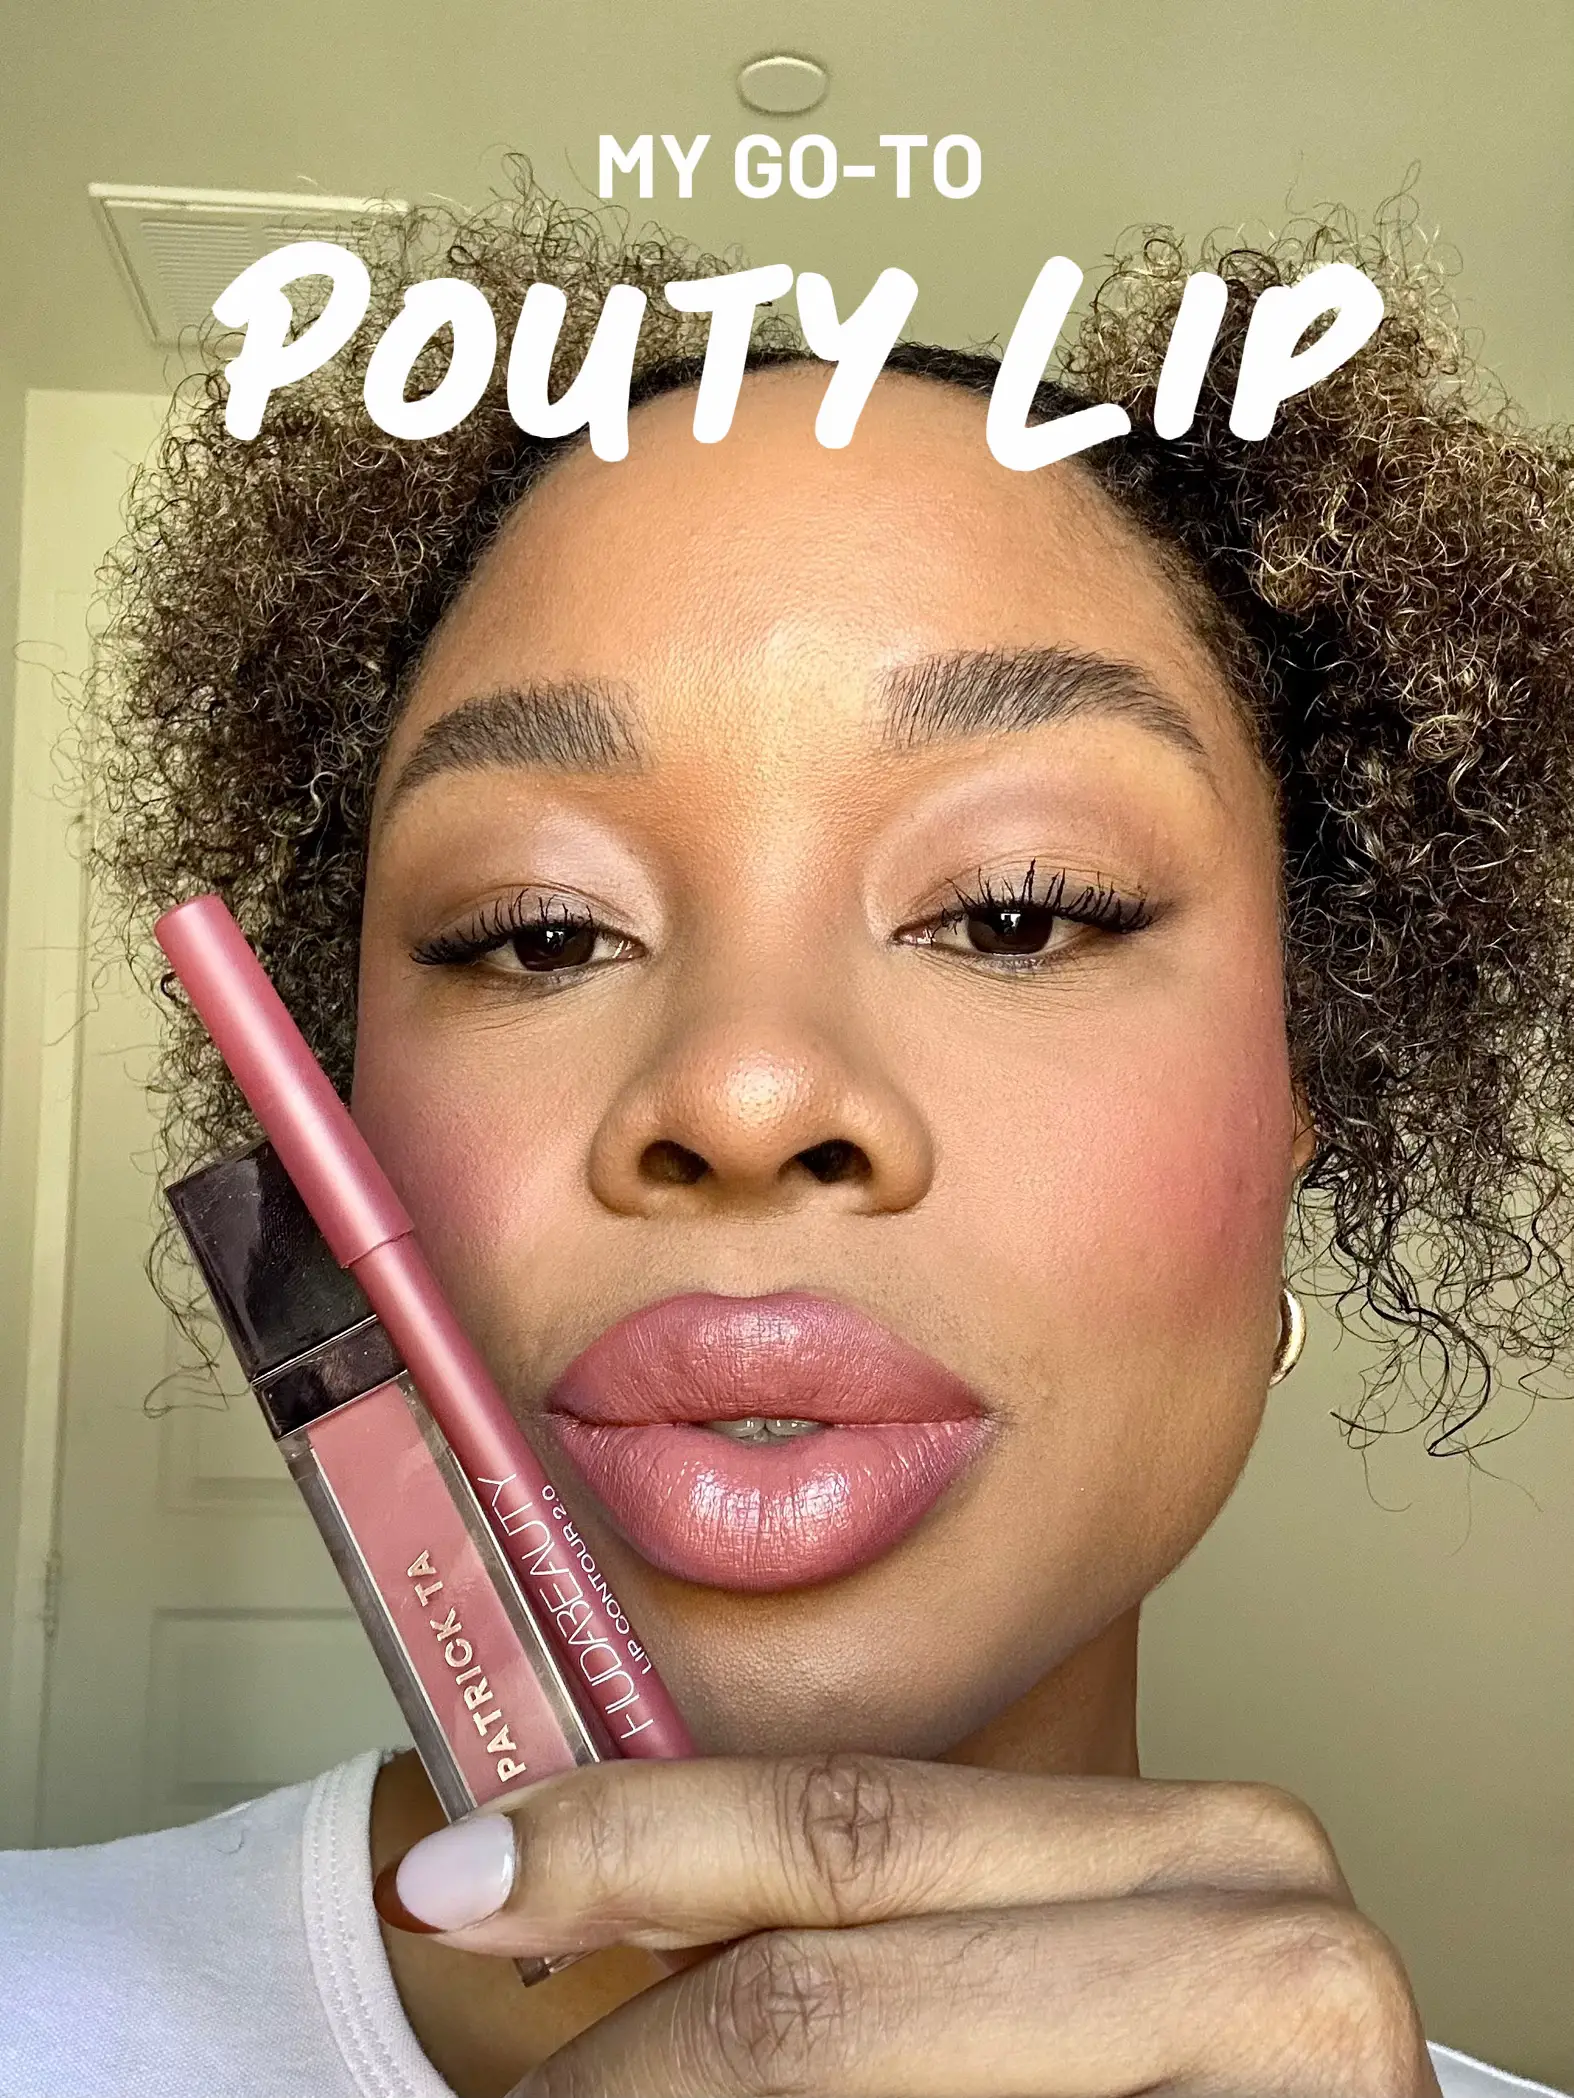 How to: The Perfect Shiny Nude Lip, Gallery posted by Nicole_jordy